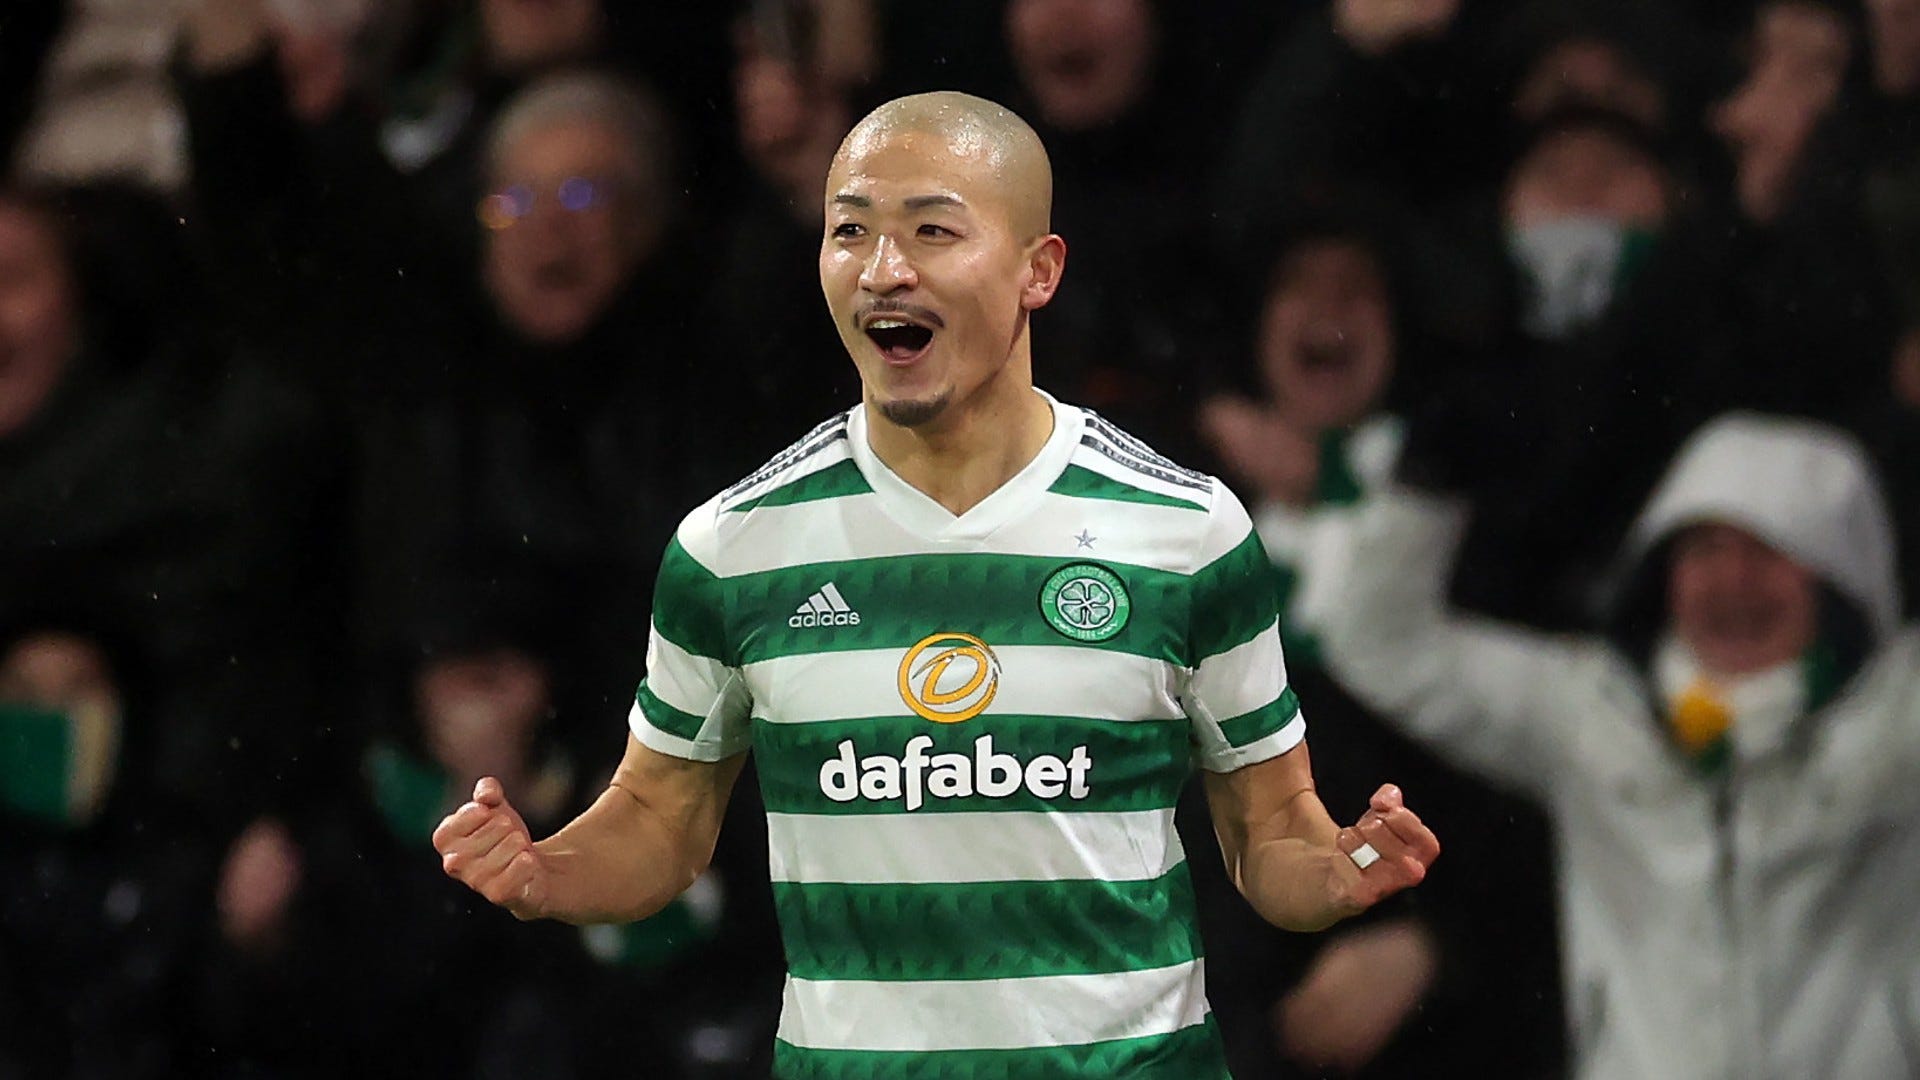 Celtic vs Wolves Live stream, TV channel, kick-off time and where to watch Goal UK